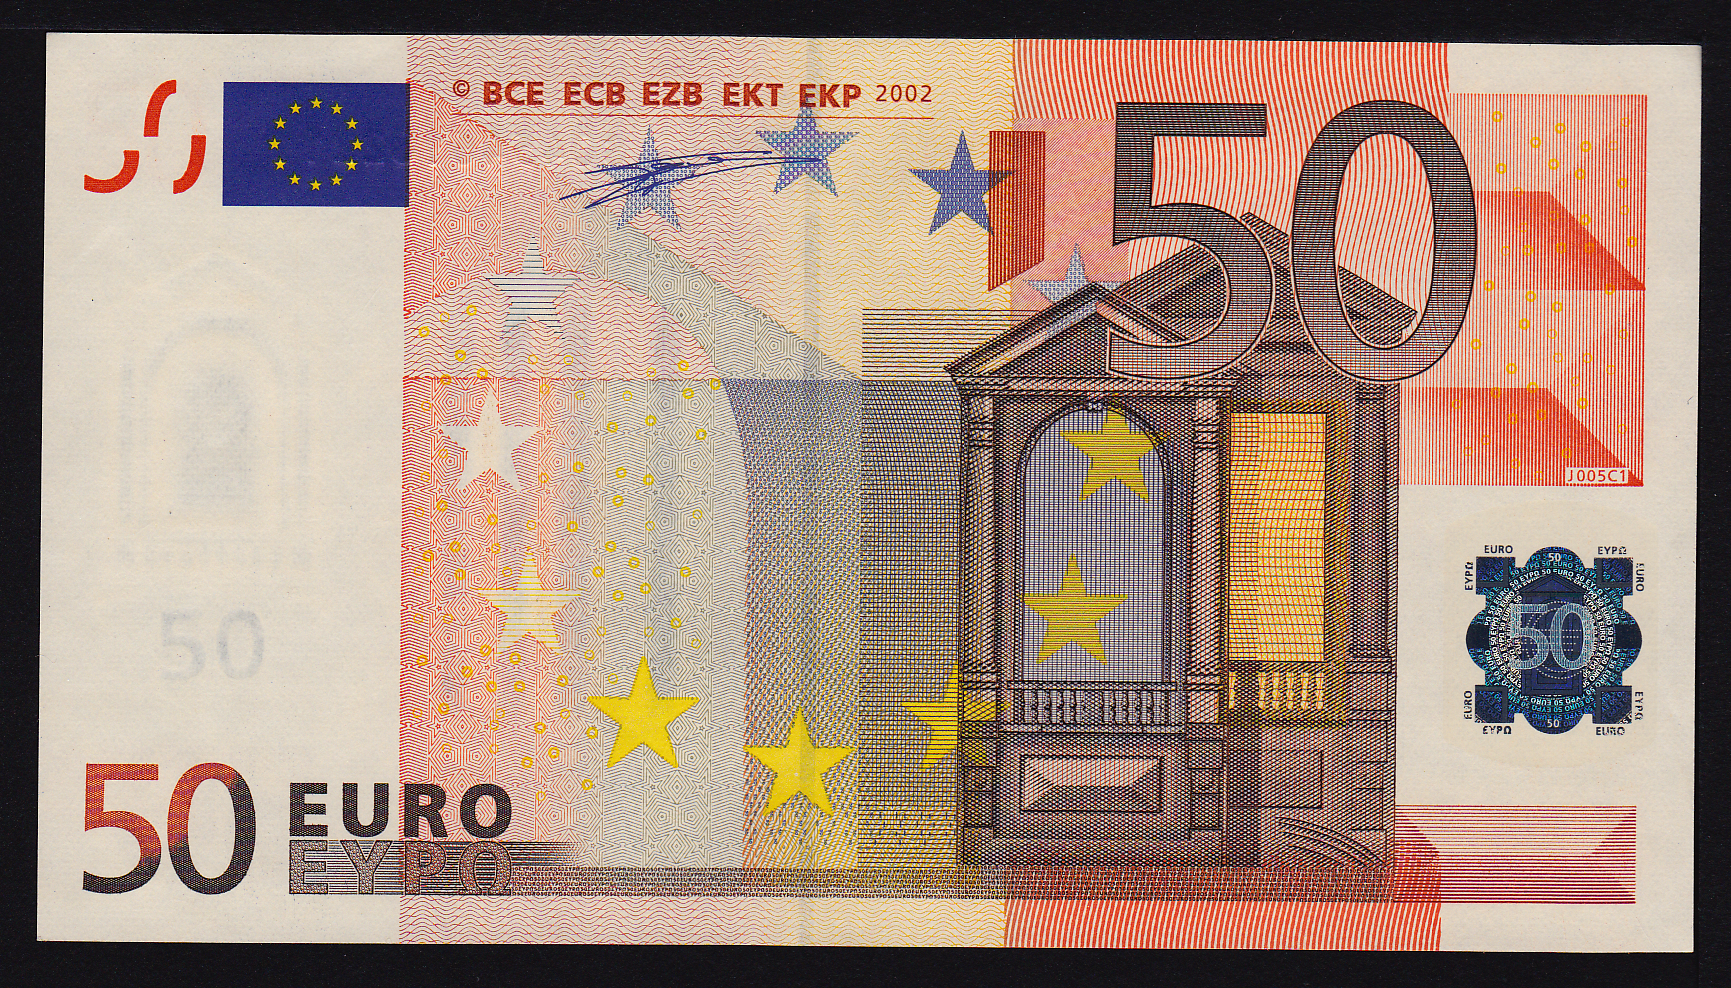 File:DXD 2015 Euro HD.png